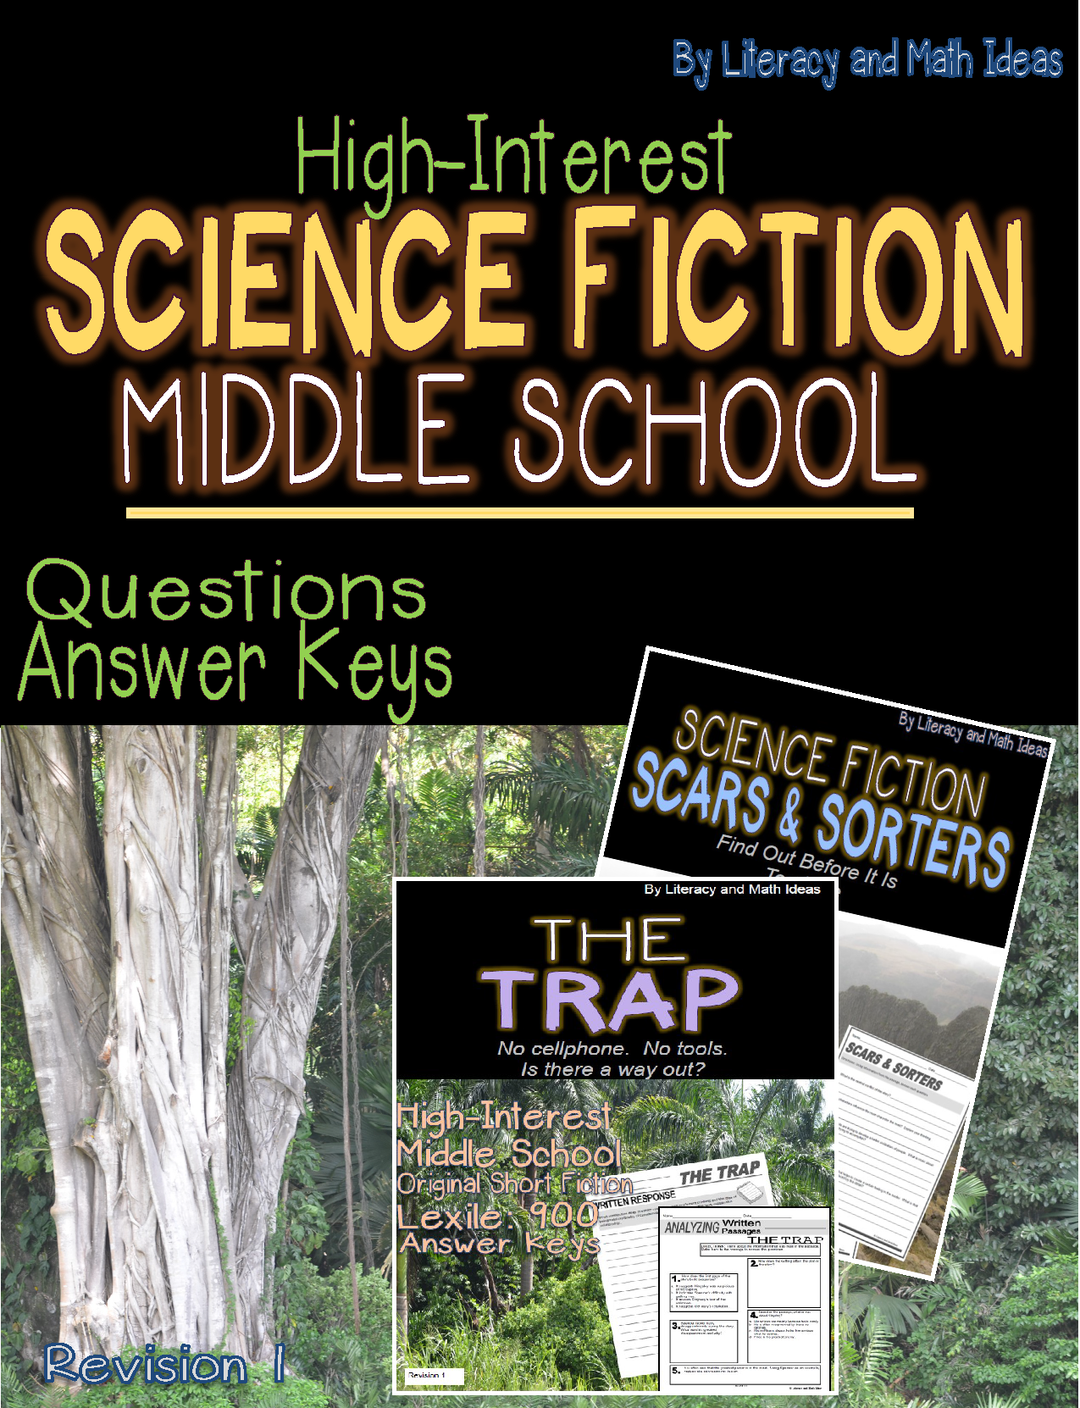 High-Interest Middle School Science Fiction (Two Stories)